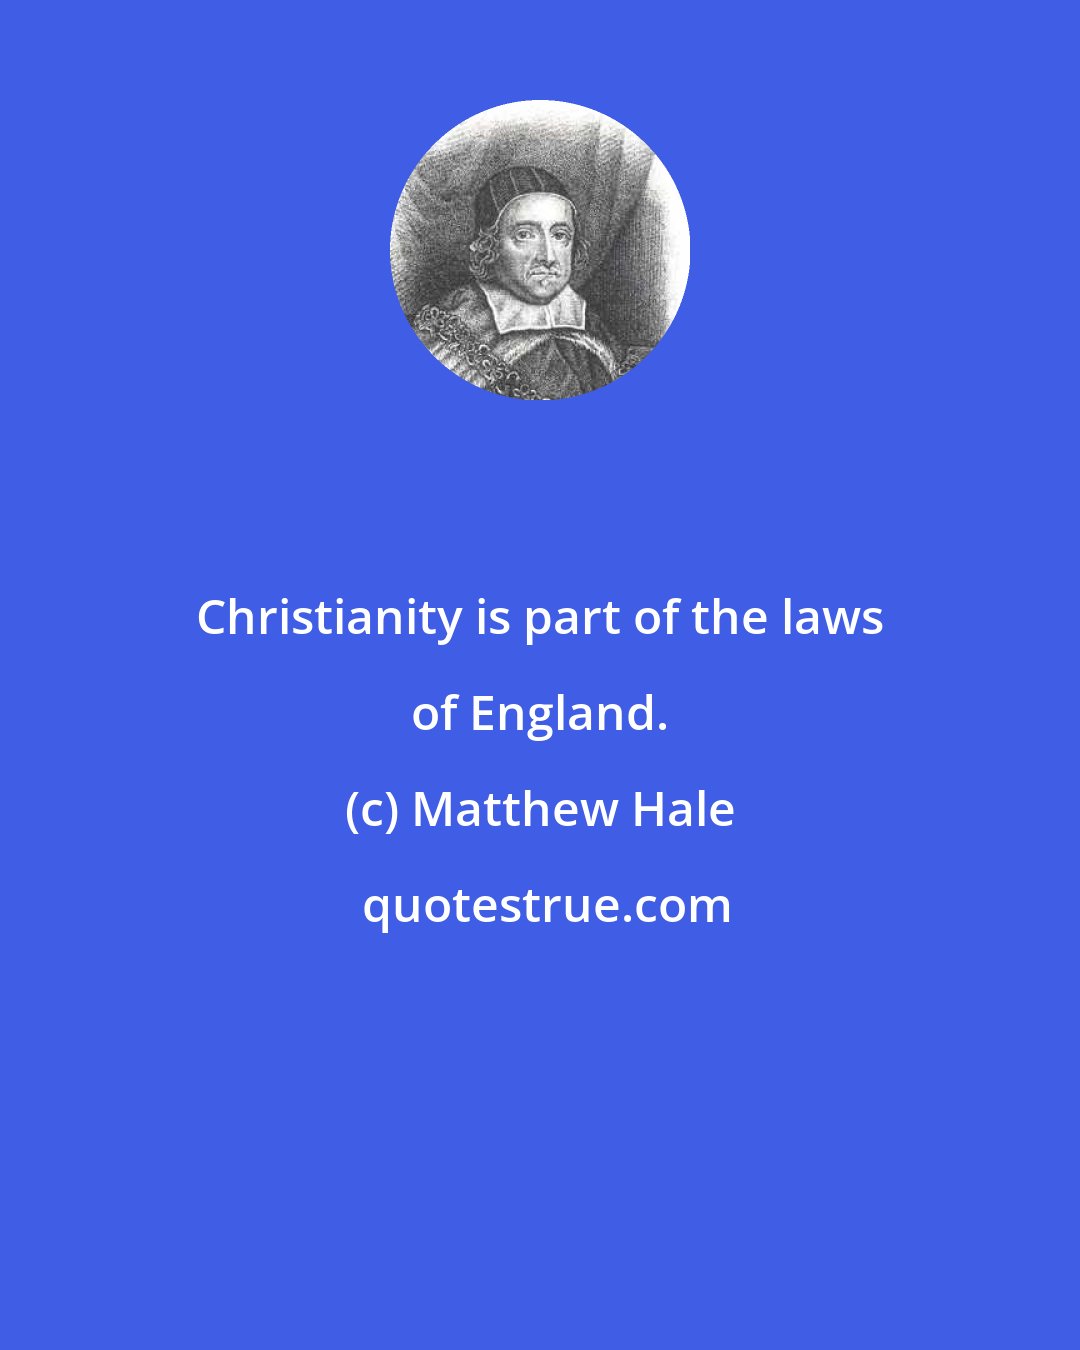 Matthew Hale: Christianity is part of the laws of England.